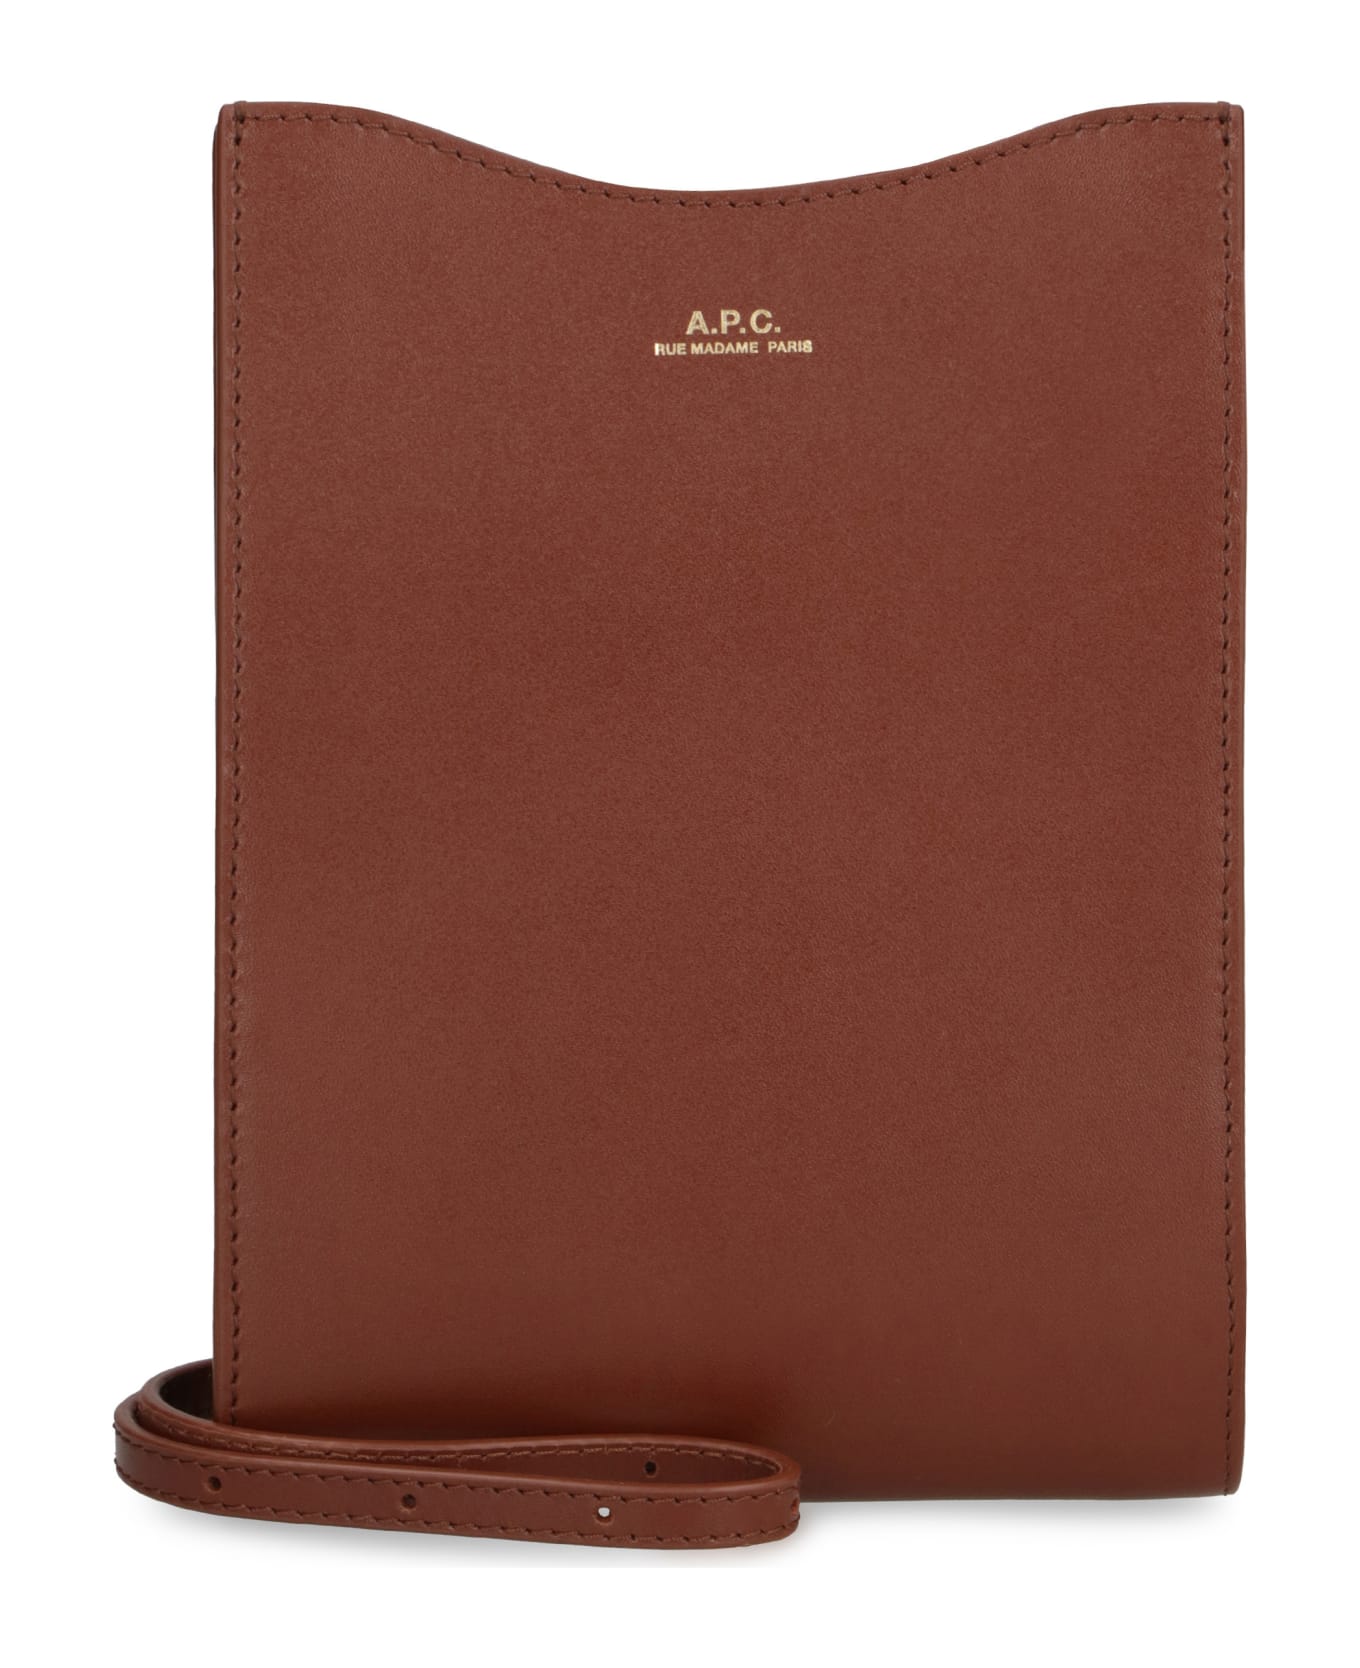 A.P.C. Leather Crossbody Bag - brown